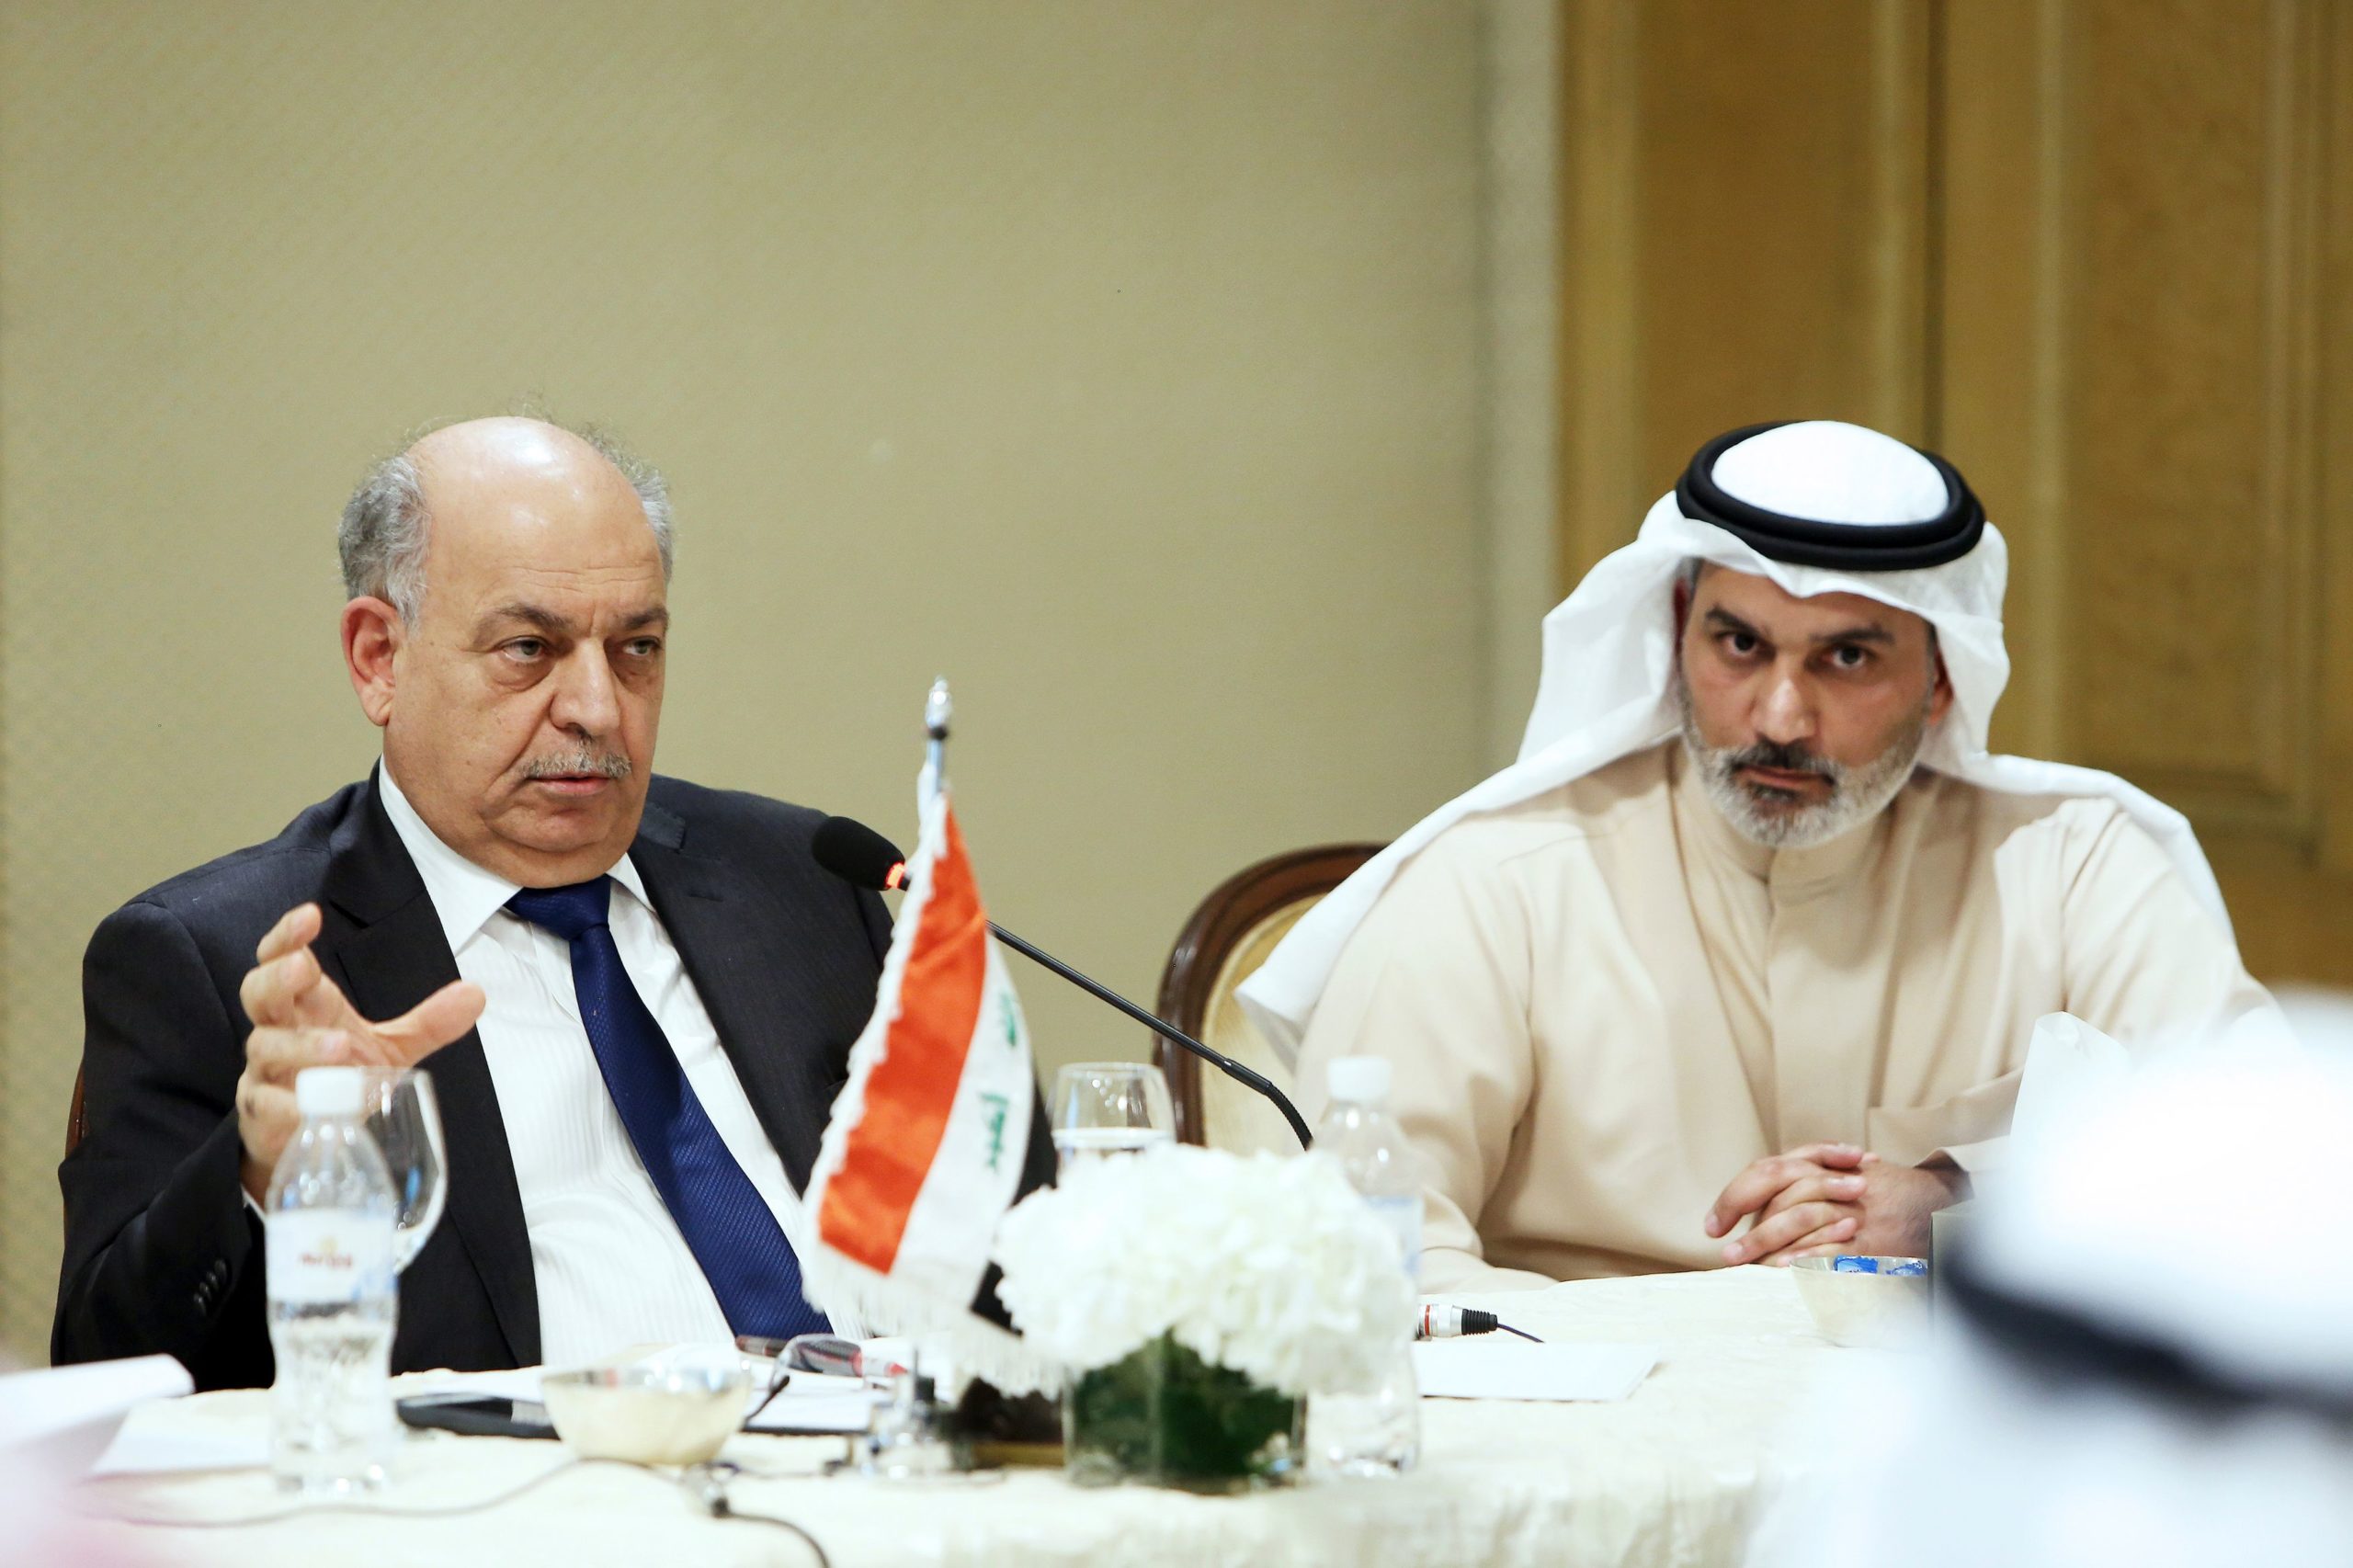 Iraqi oil minister Thamer Ghadban speaks as OPEC's top diplomat Haitham al-Ghais looks on during a joint press conference in Kuwait City on Dec. 23, 2018. (Yasser Al-Zayyat/AFP via Getty Images)